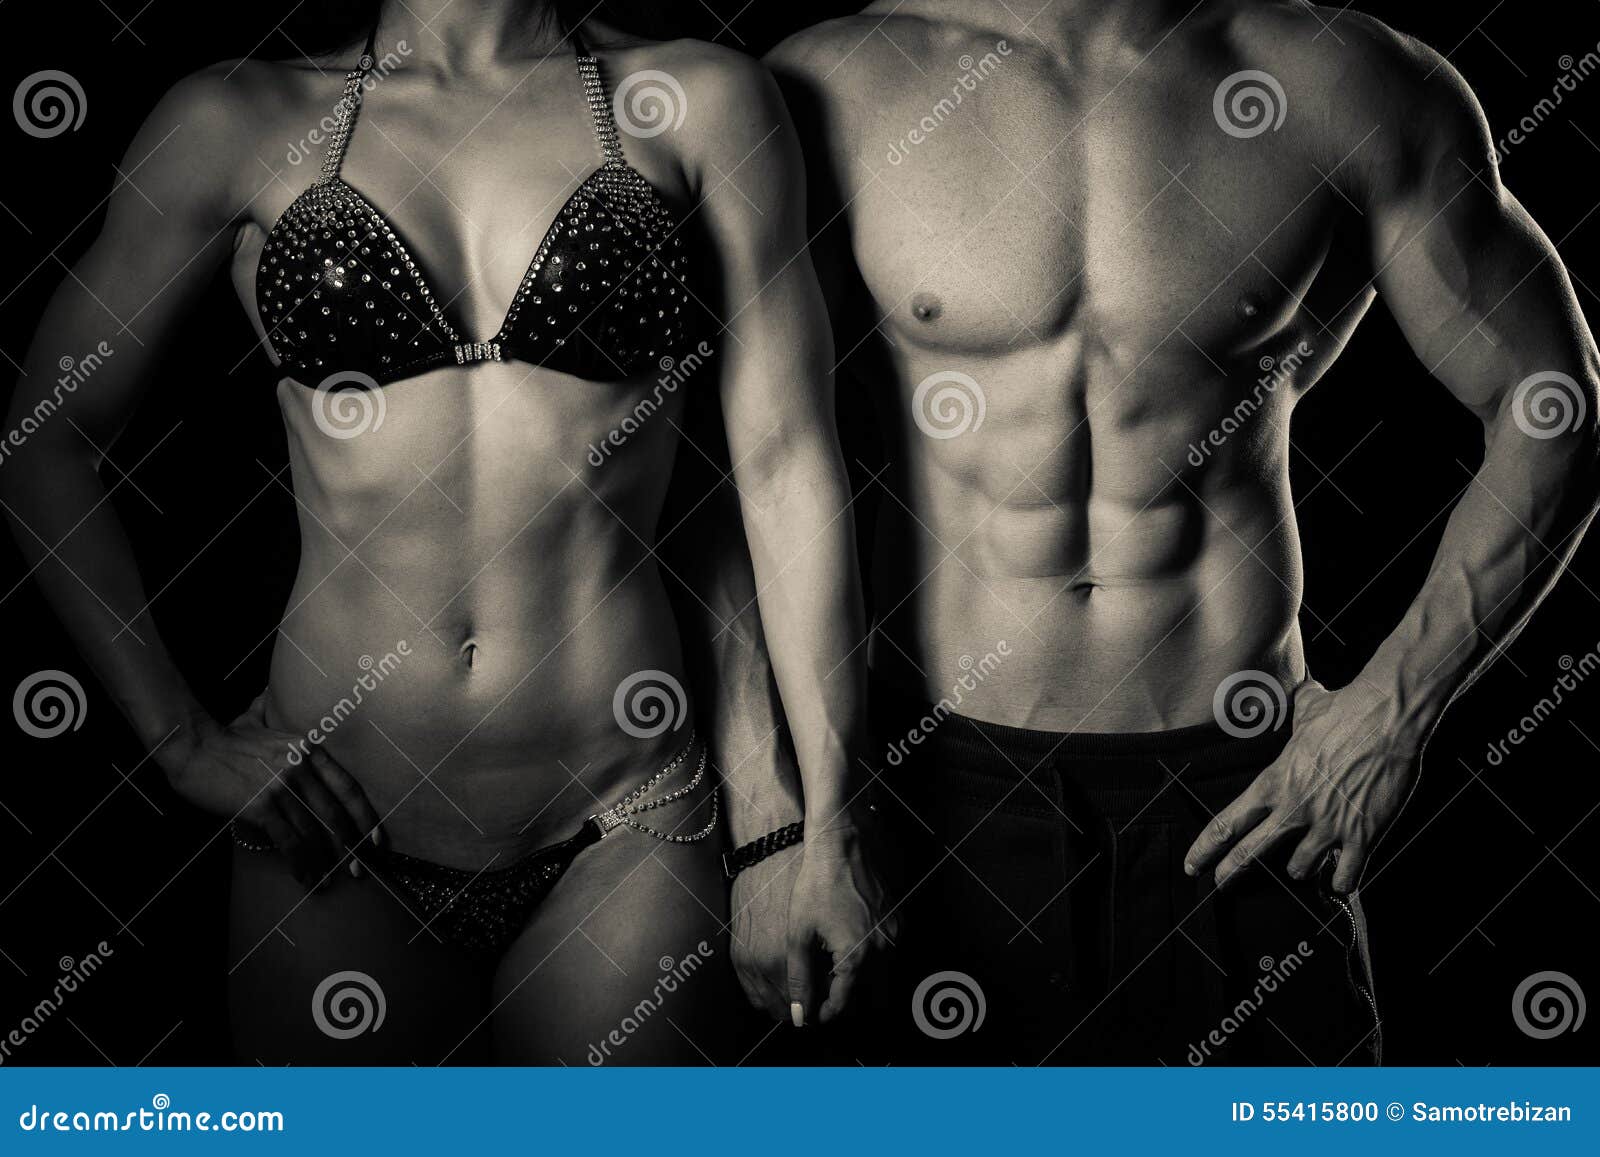 fitness couple poses in studio - fit man and woman